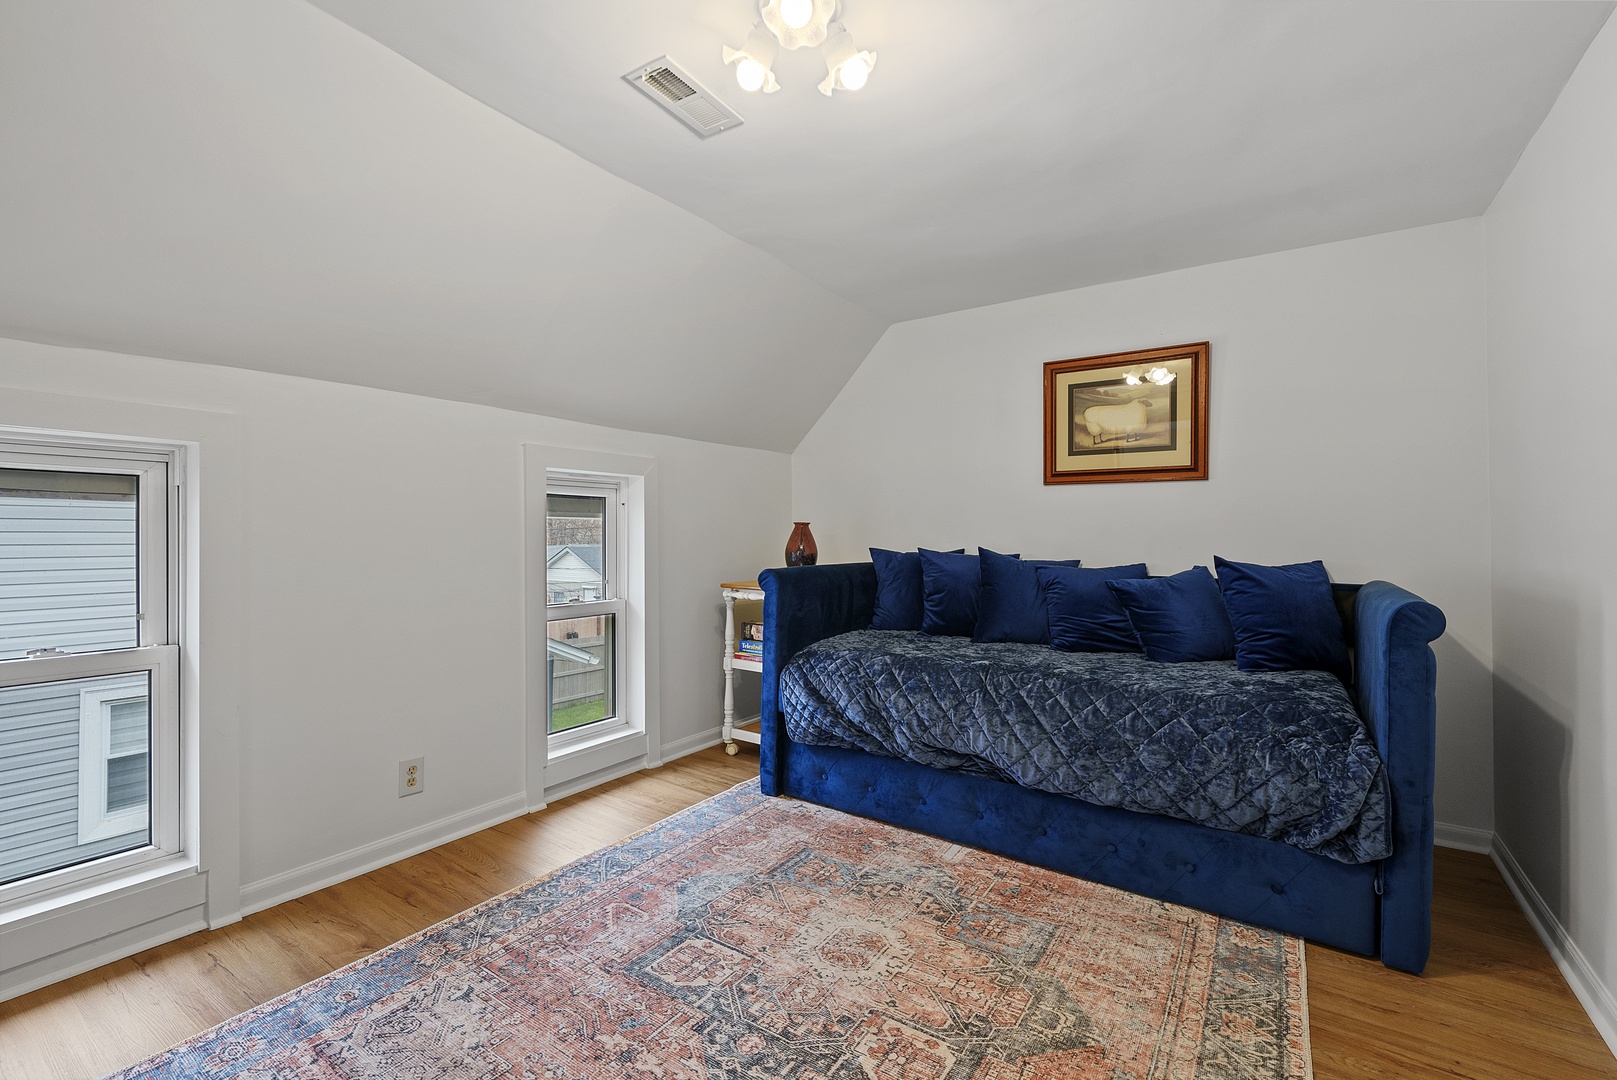 Head upstairs to the loft sleeping area, with a twin daybed & twin trundle